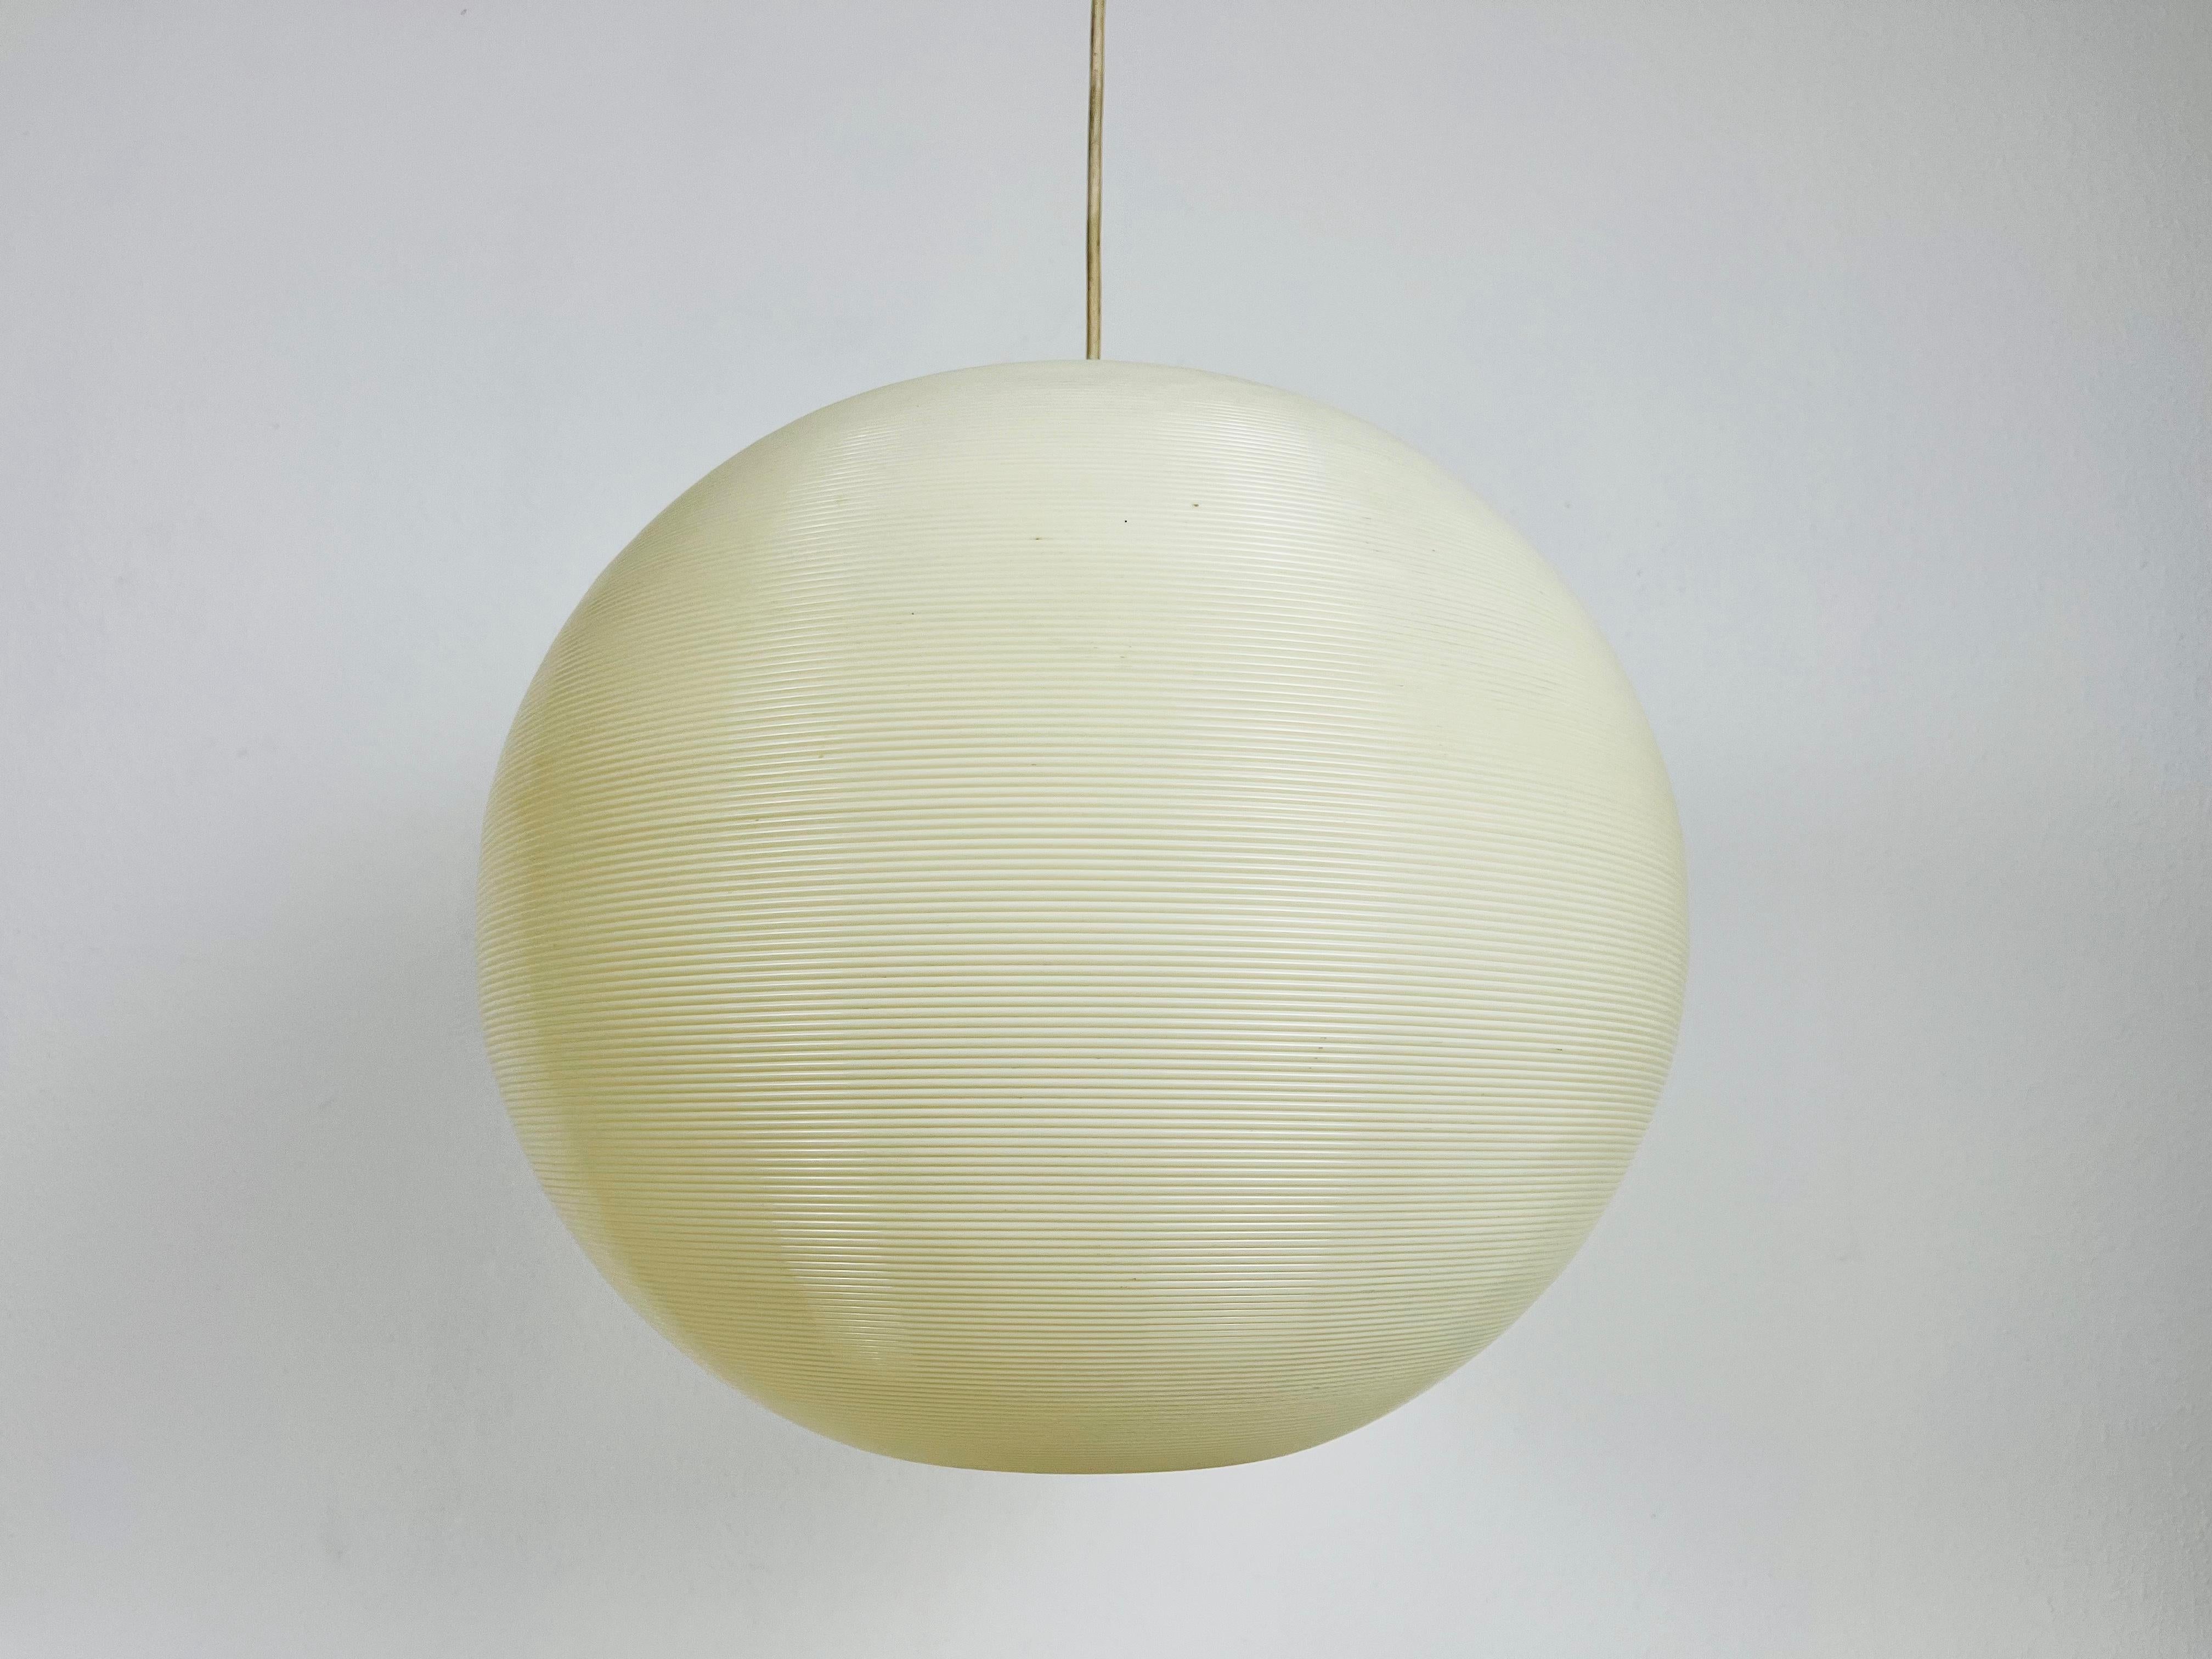 Mid-Century Modern Rotaflex ball pendant lamp made in the 1960s. The lamp shade is made of continuous plastic cords spun into a ceiling fixture. The top of the lamp is hard plastic. The lamp in good vintage condition.

Measurements:

Height: